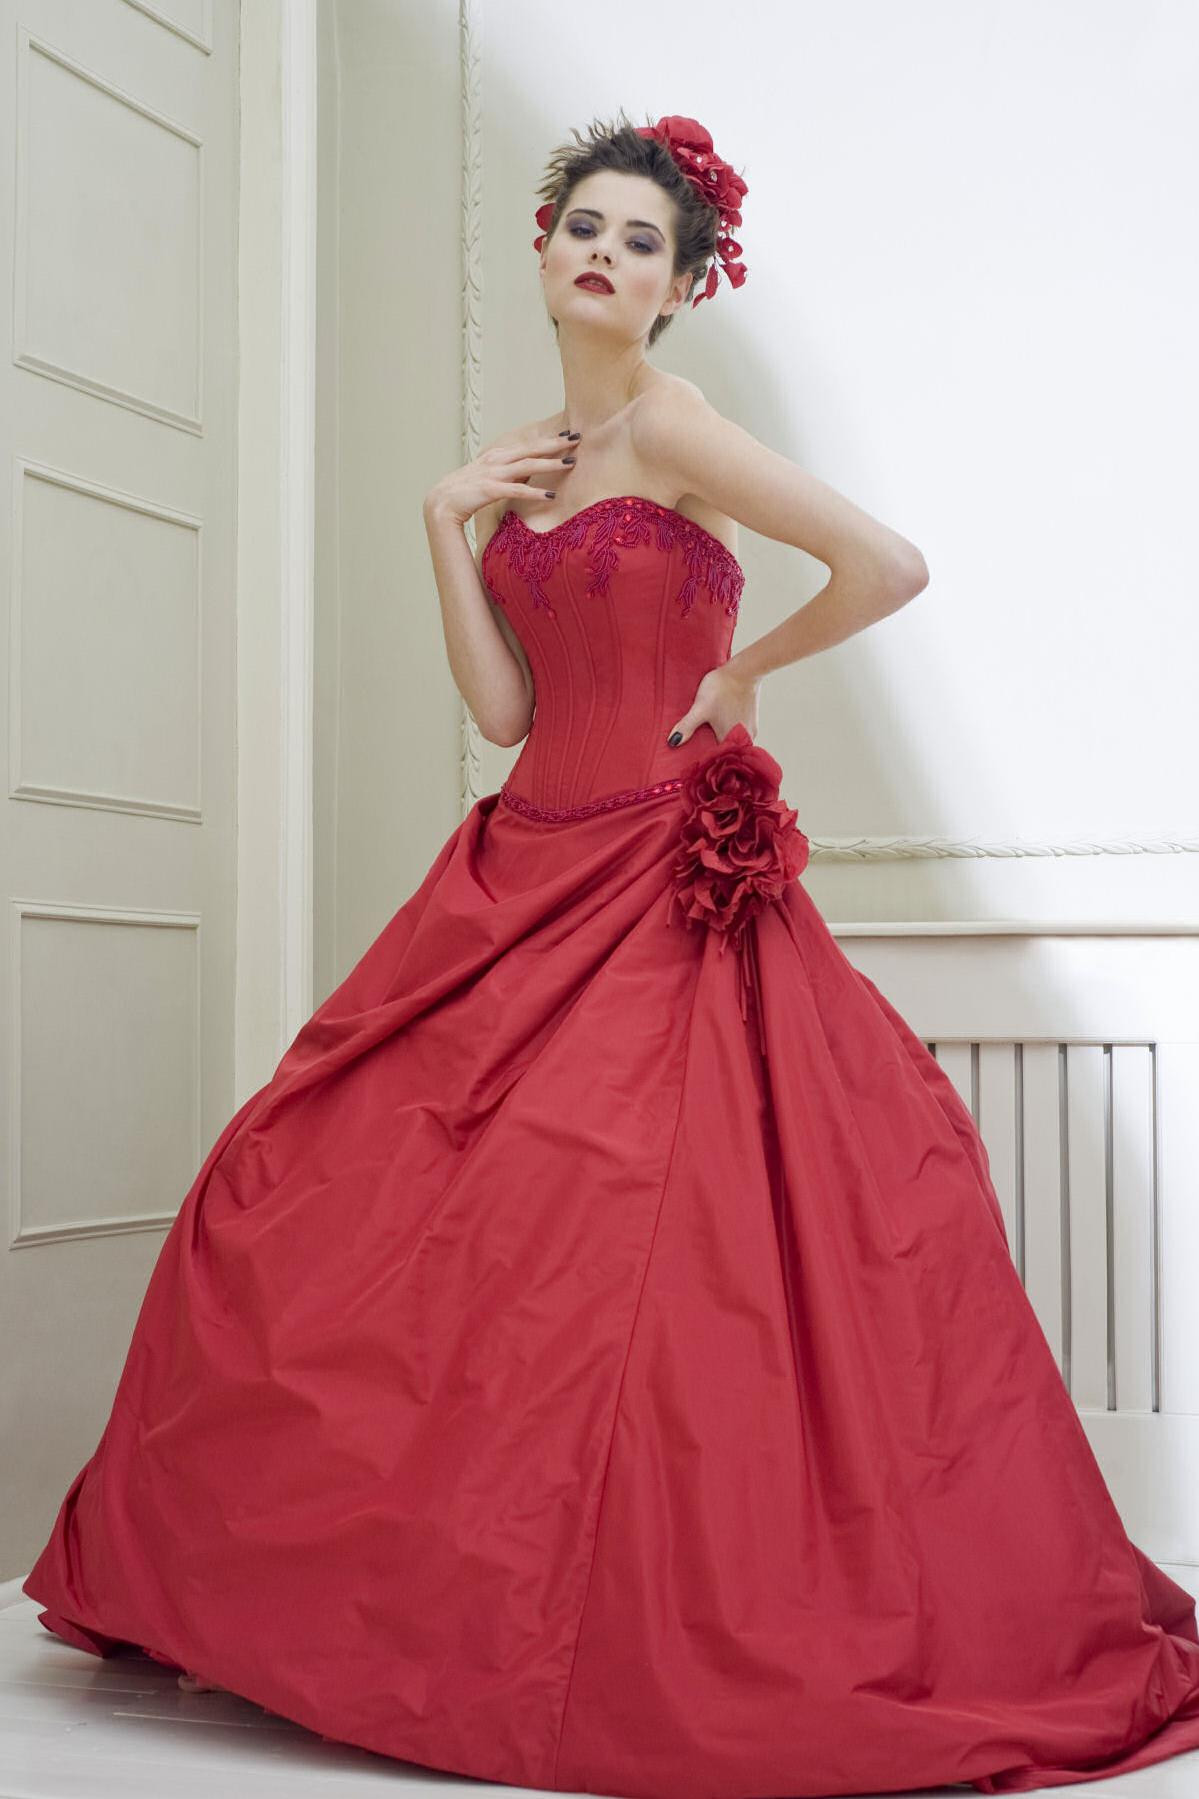 Red Wedding Dresses & Bridal Gowns | hitched.co.uk